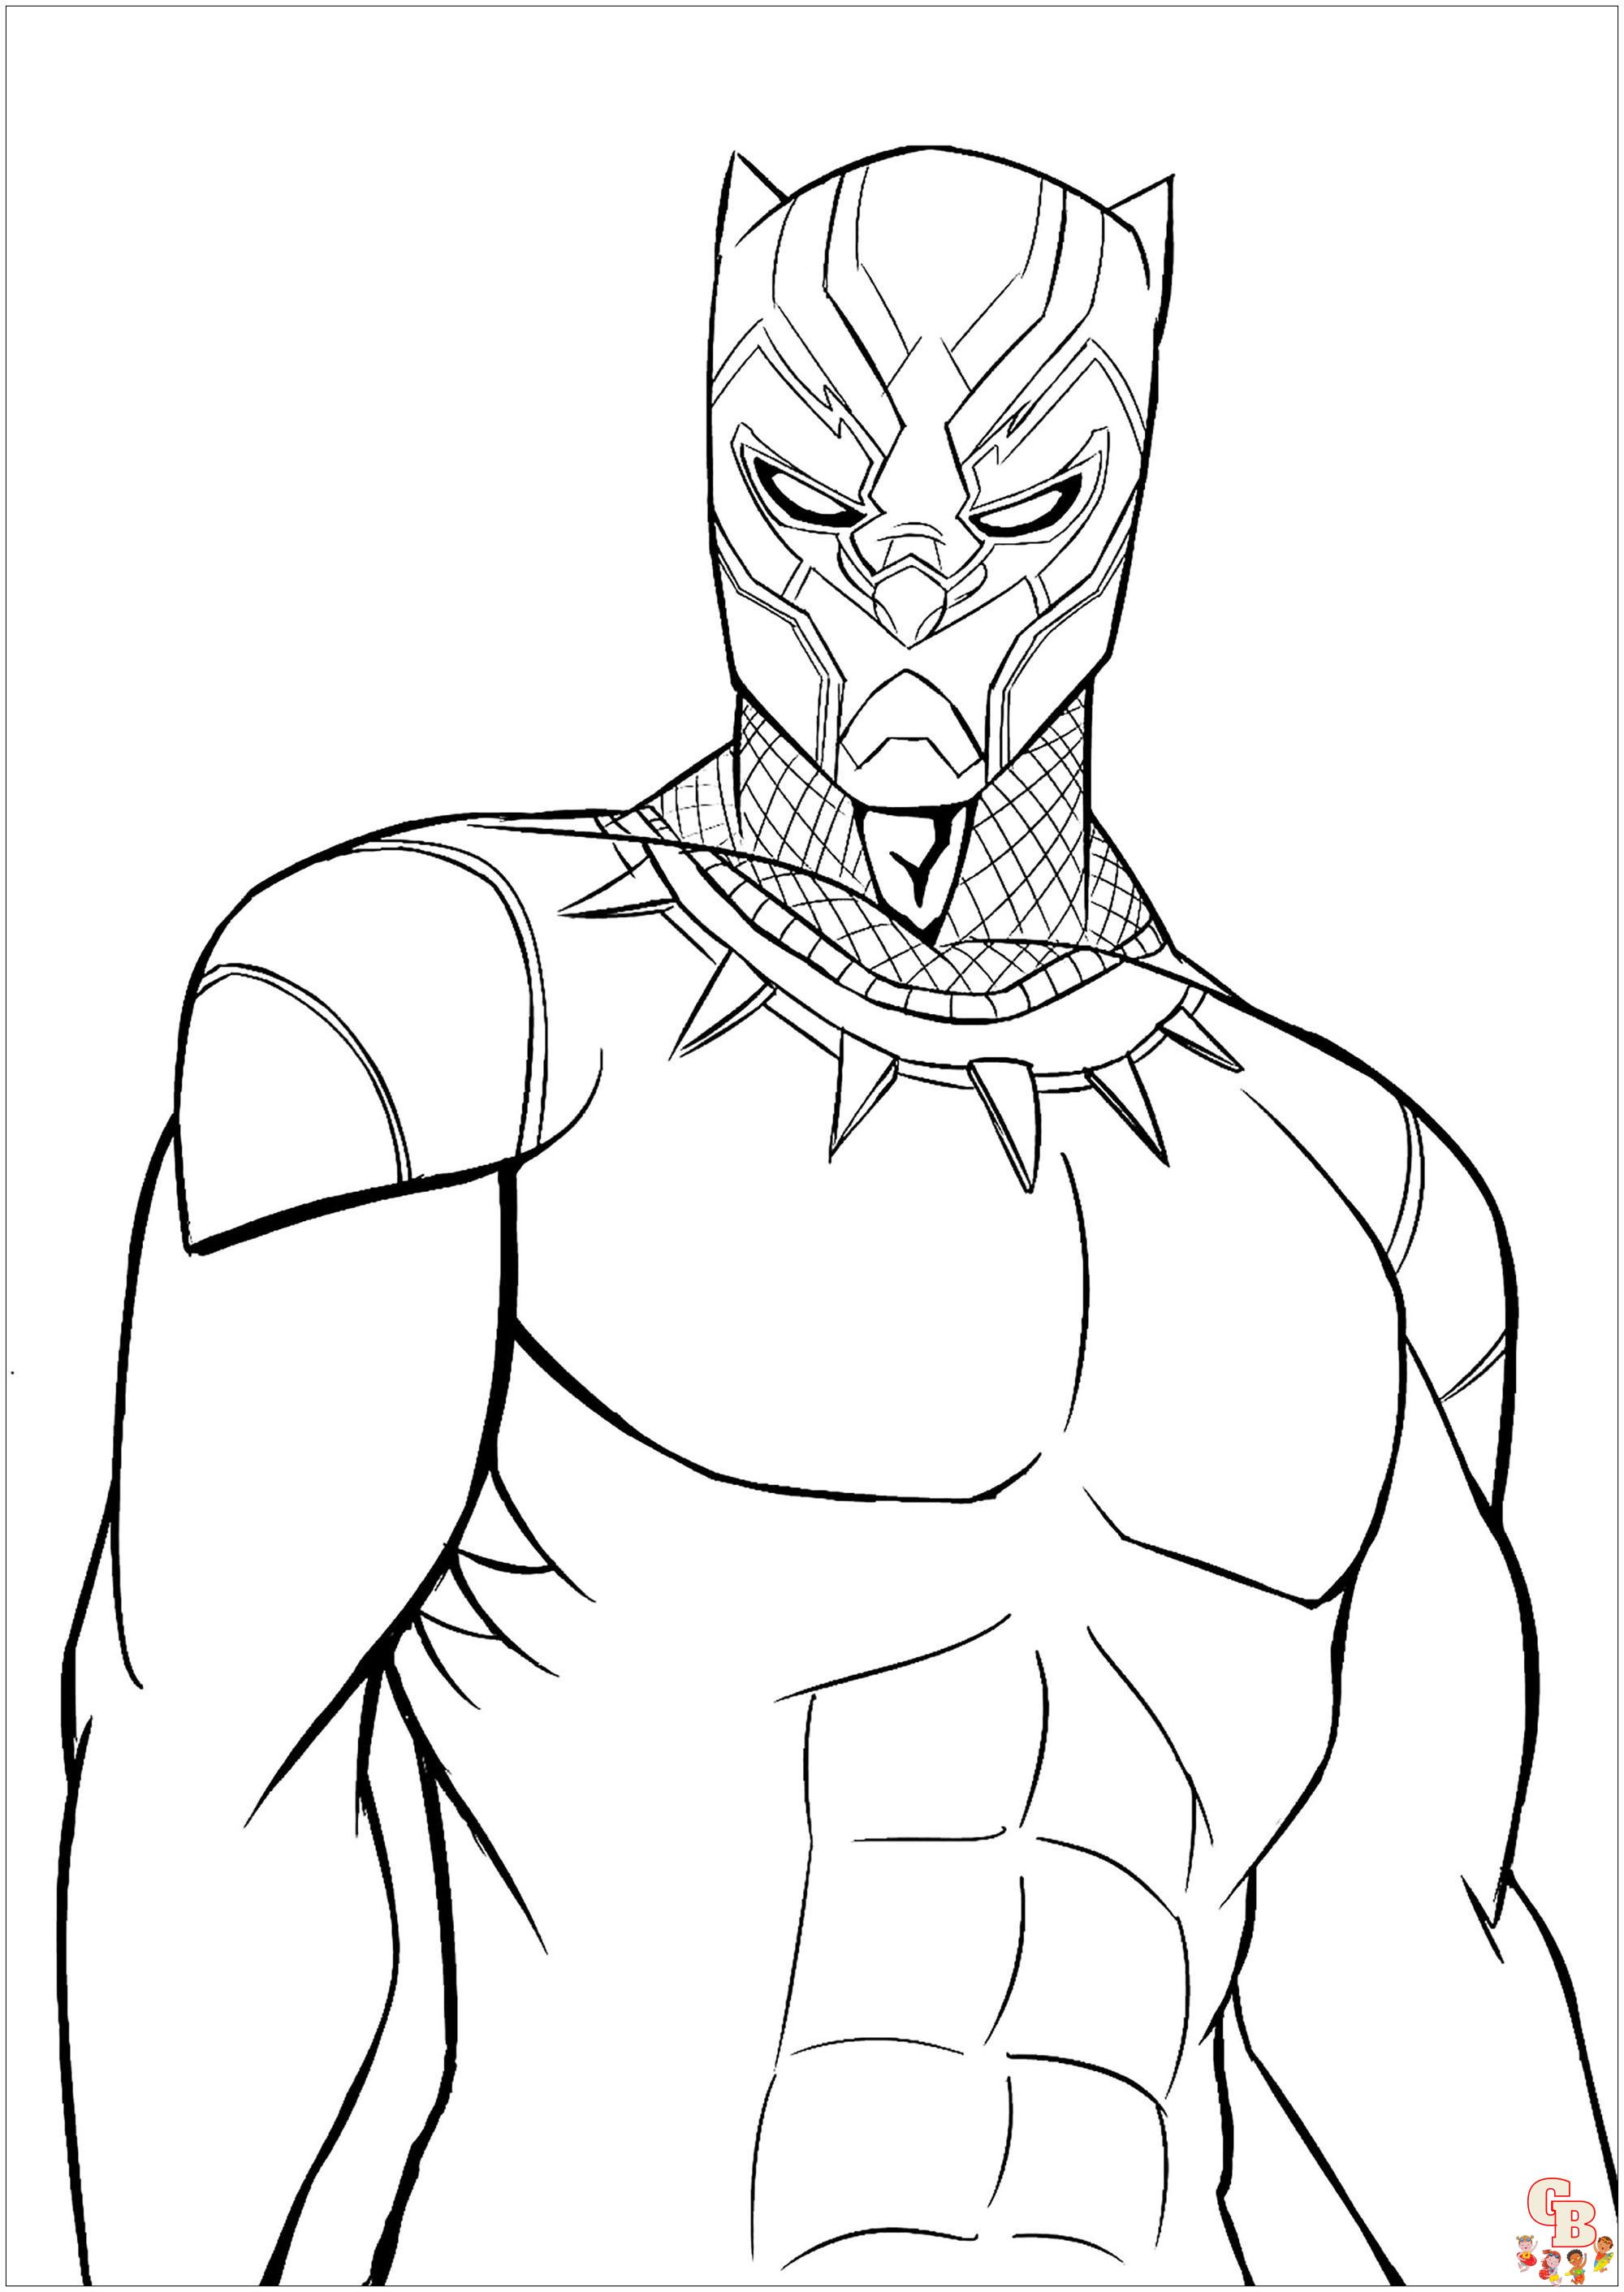 Free Black Panther Coloring Pages | GBcoloring